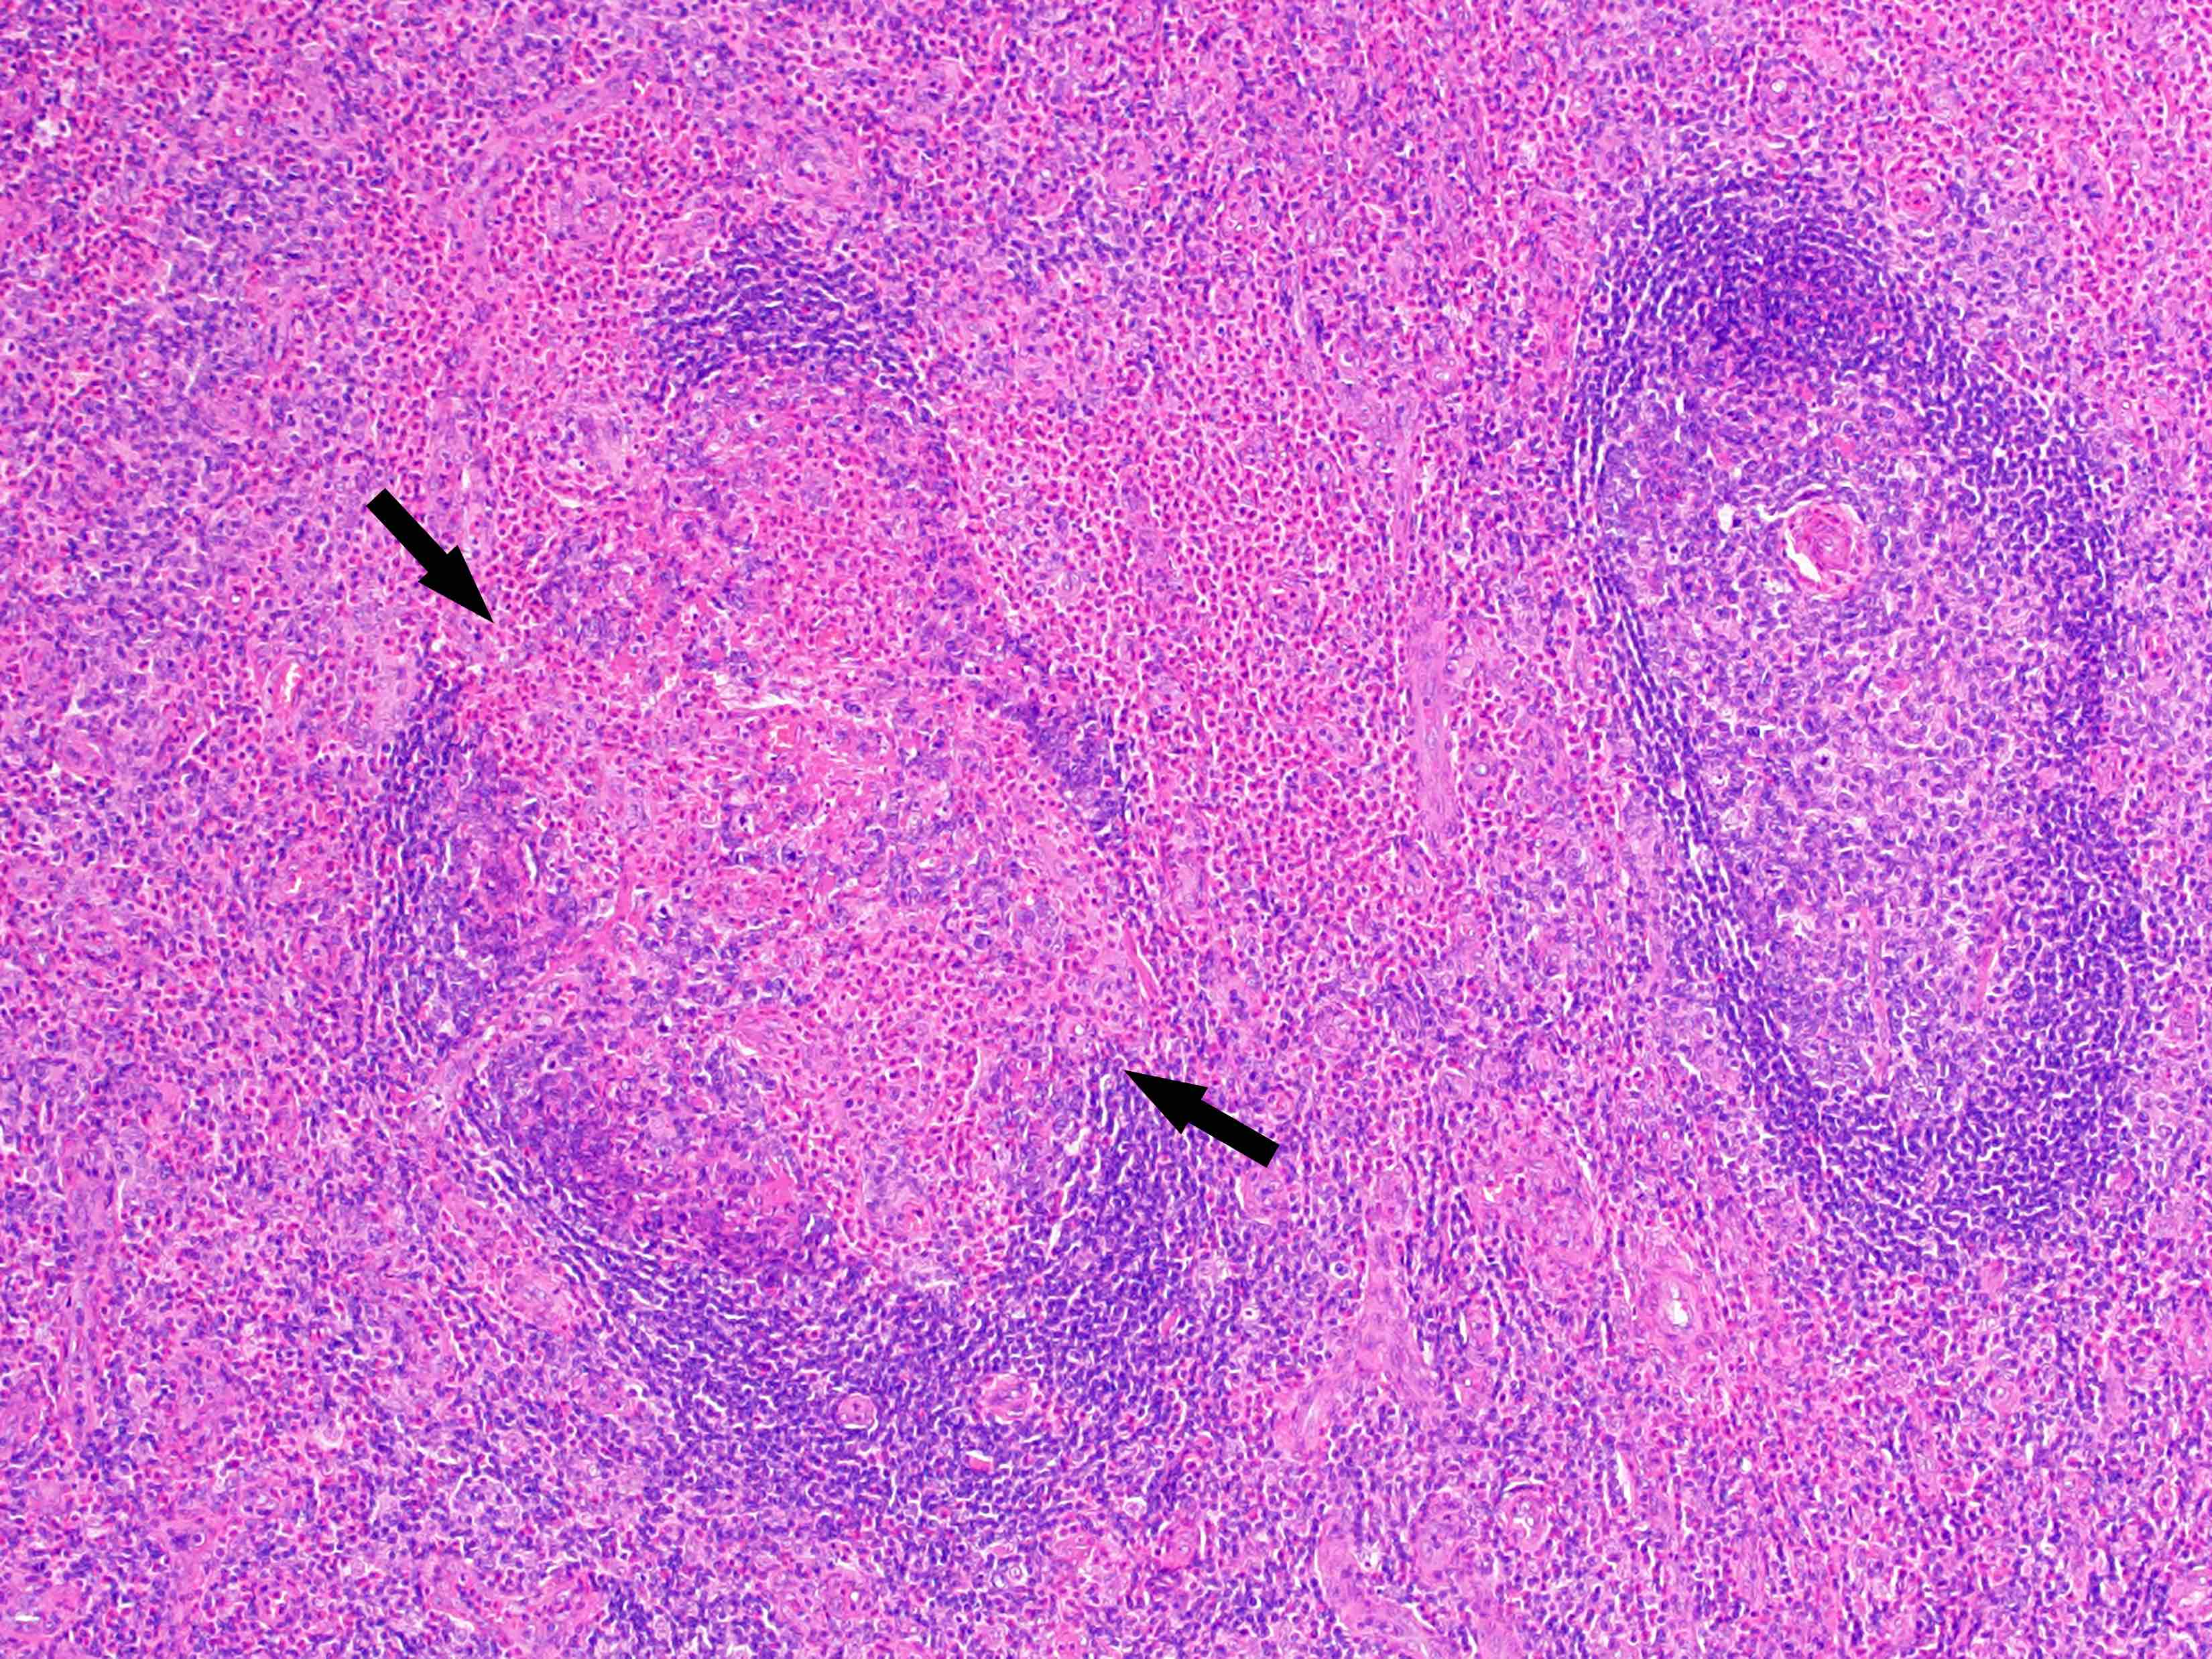 Excisional biopsy of lymph node